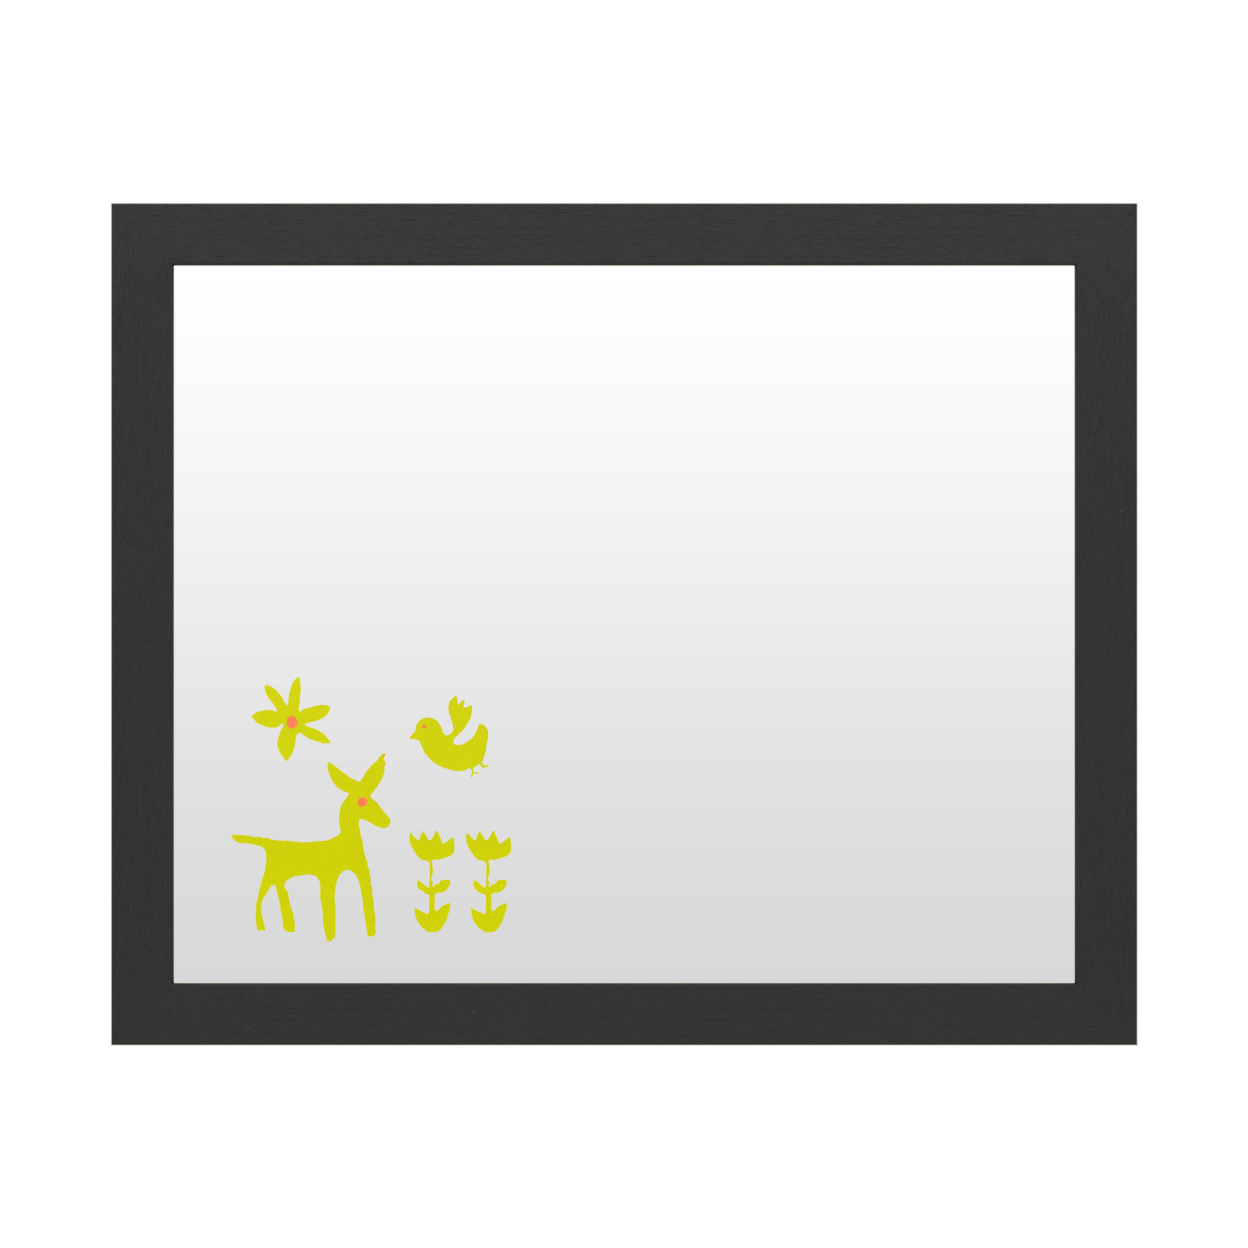 Dry Erase 16 X 20 Marker Board With Printed Artwork - Studio W Otomi Tile Iii White Board - Ready To Hang